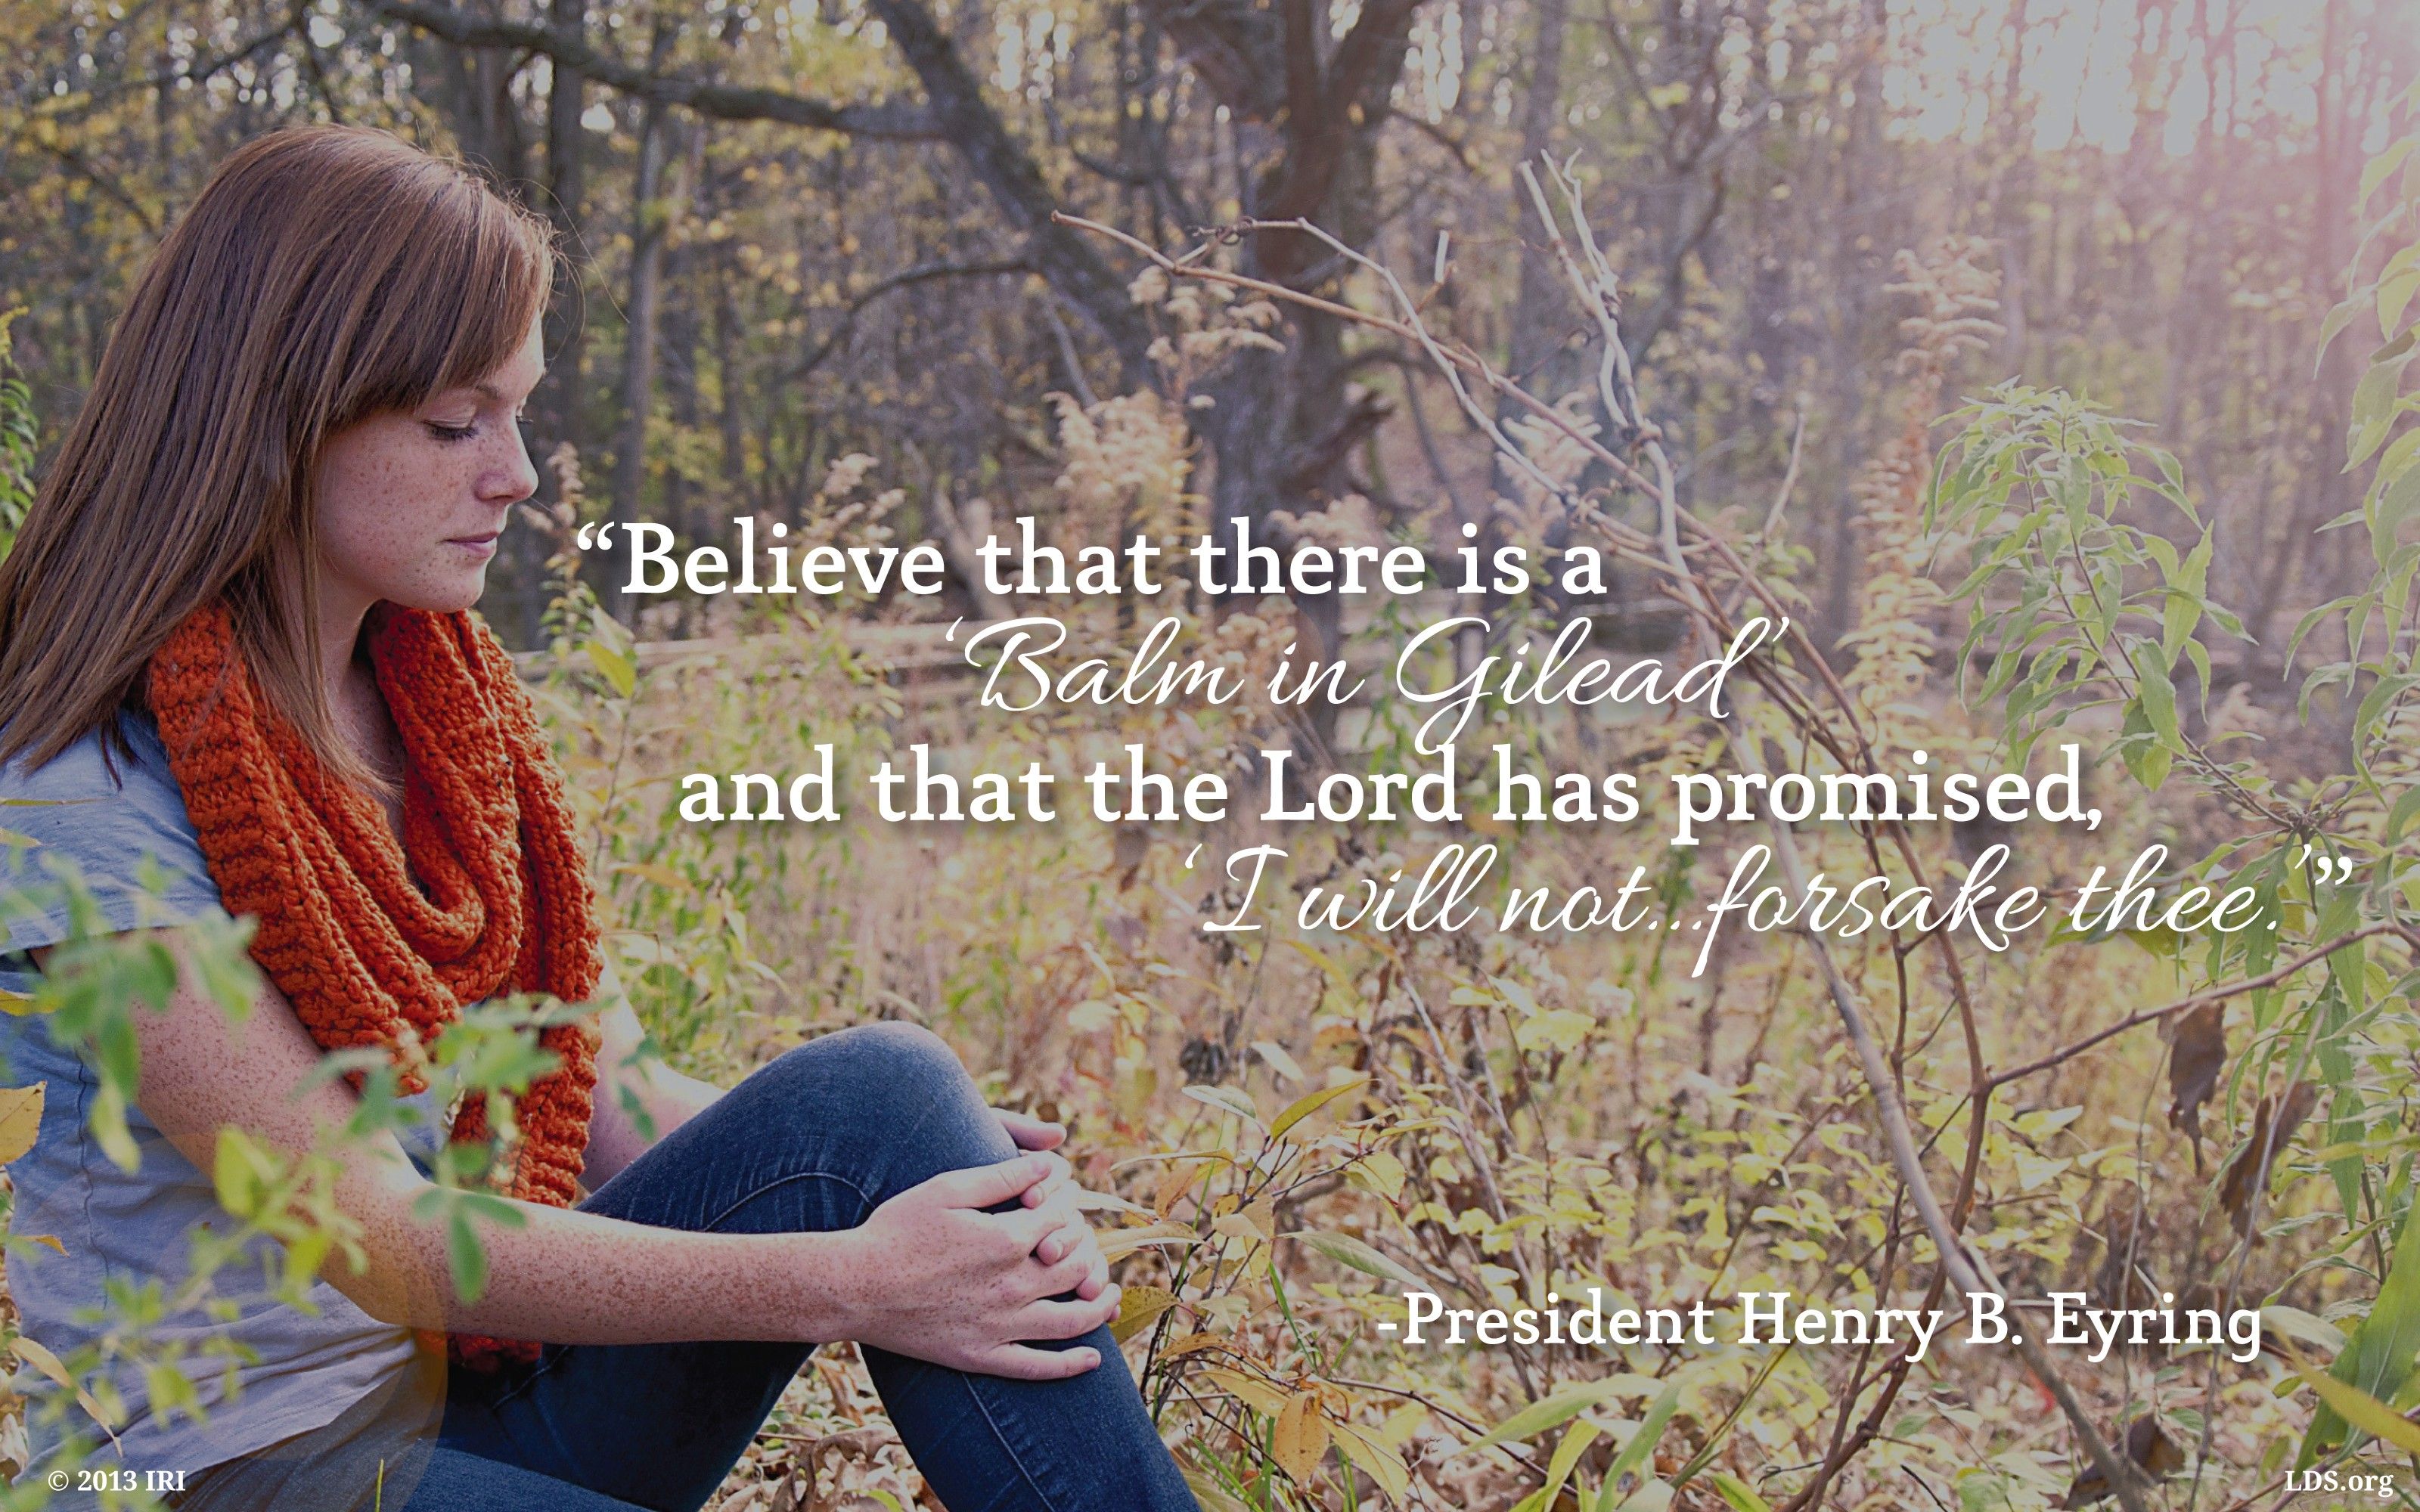 “Believe that there is a ‘balm in Gilead’ and that the Lord has promised, ‘I will not … forsake thee.’”—President Henry B. Eyring, “Mountains to Climb”